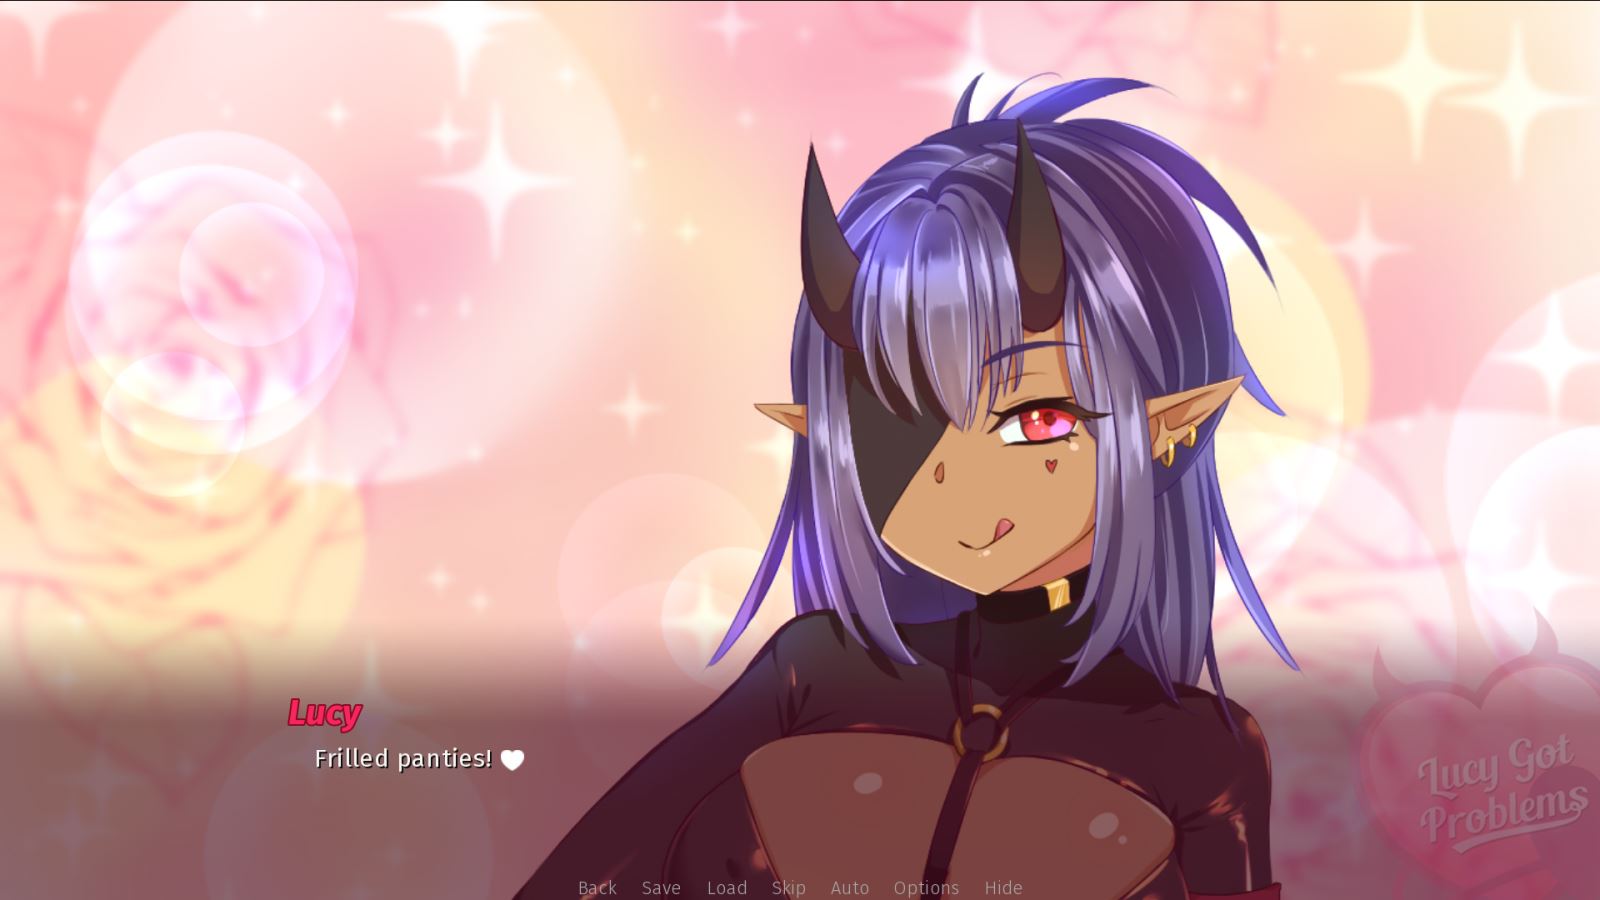 Flat Chest Hentai Games - Ren'Py] Lucy Got Problems - v1.01 by Flat Chest Dev 18+ Adult xxx Porn Game  Download